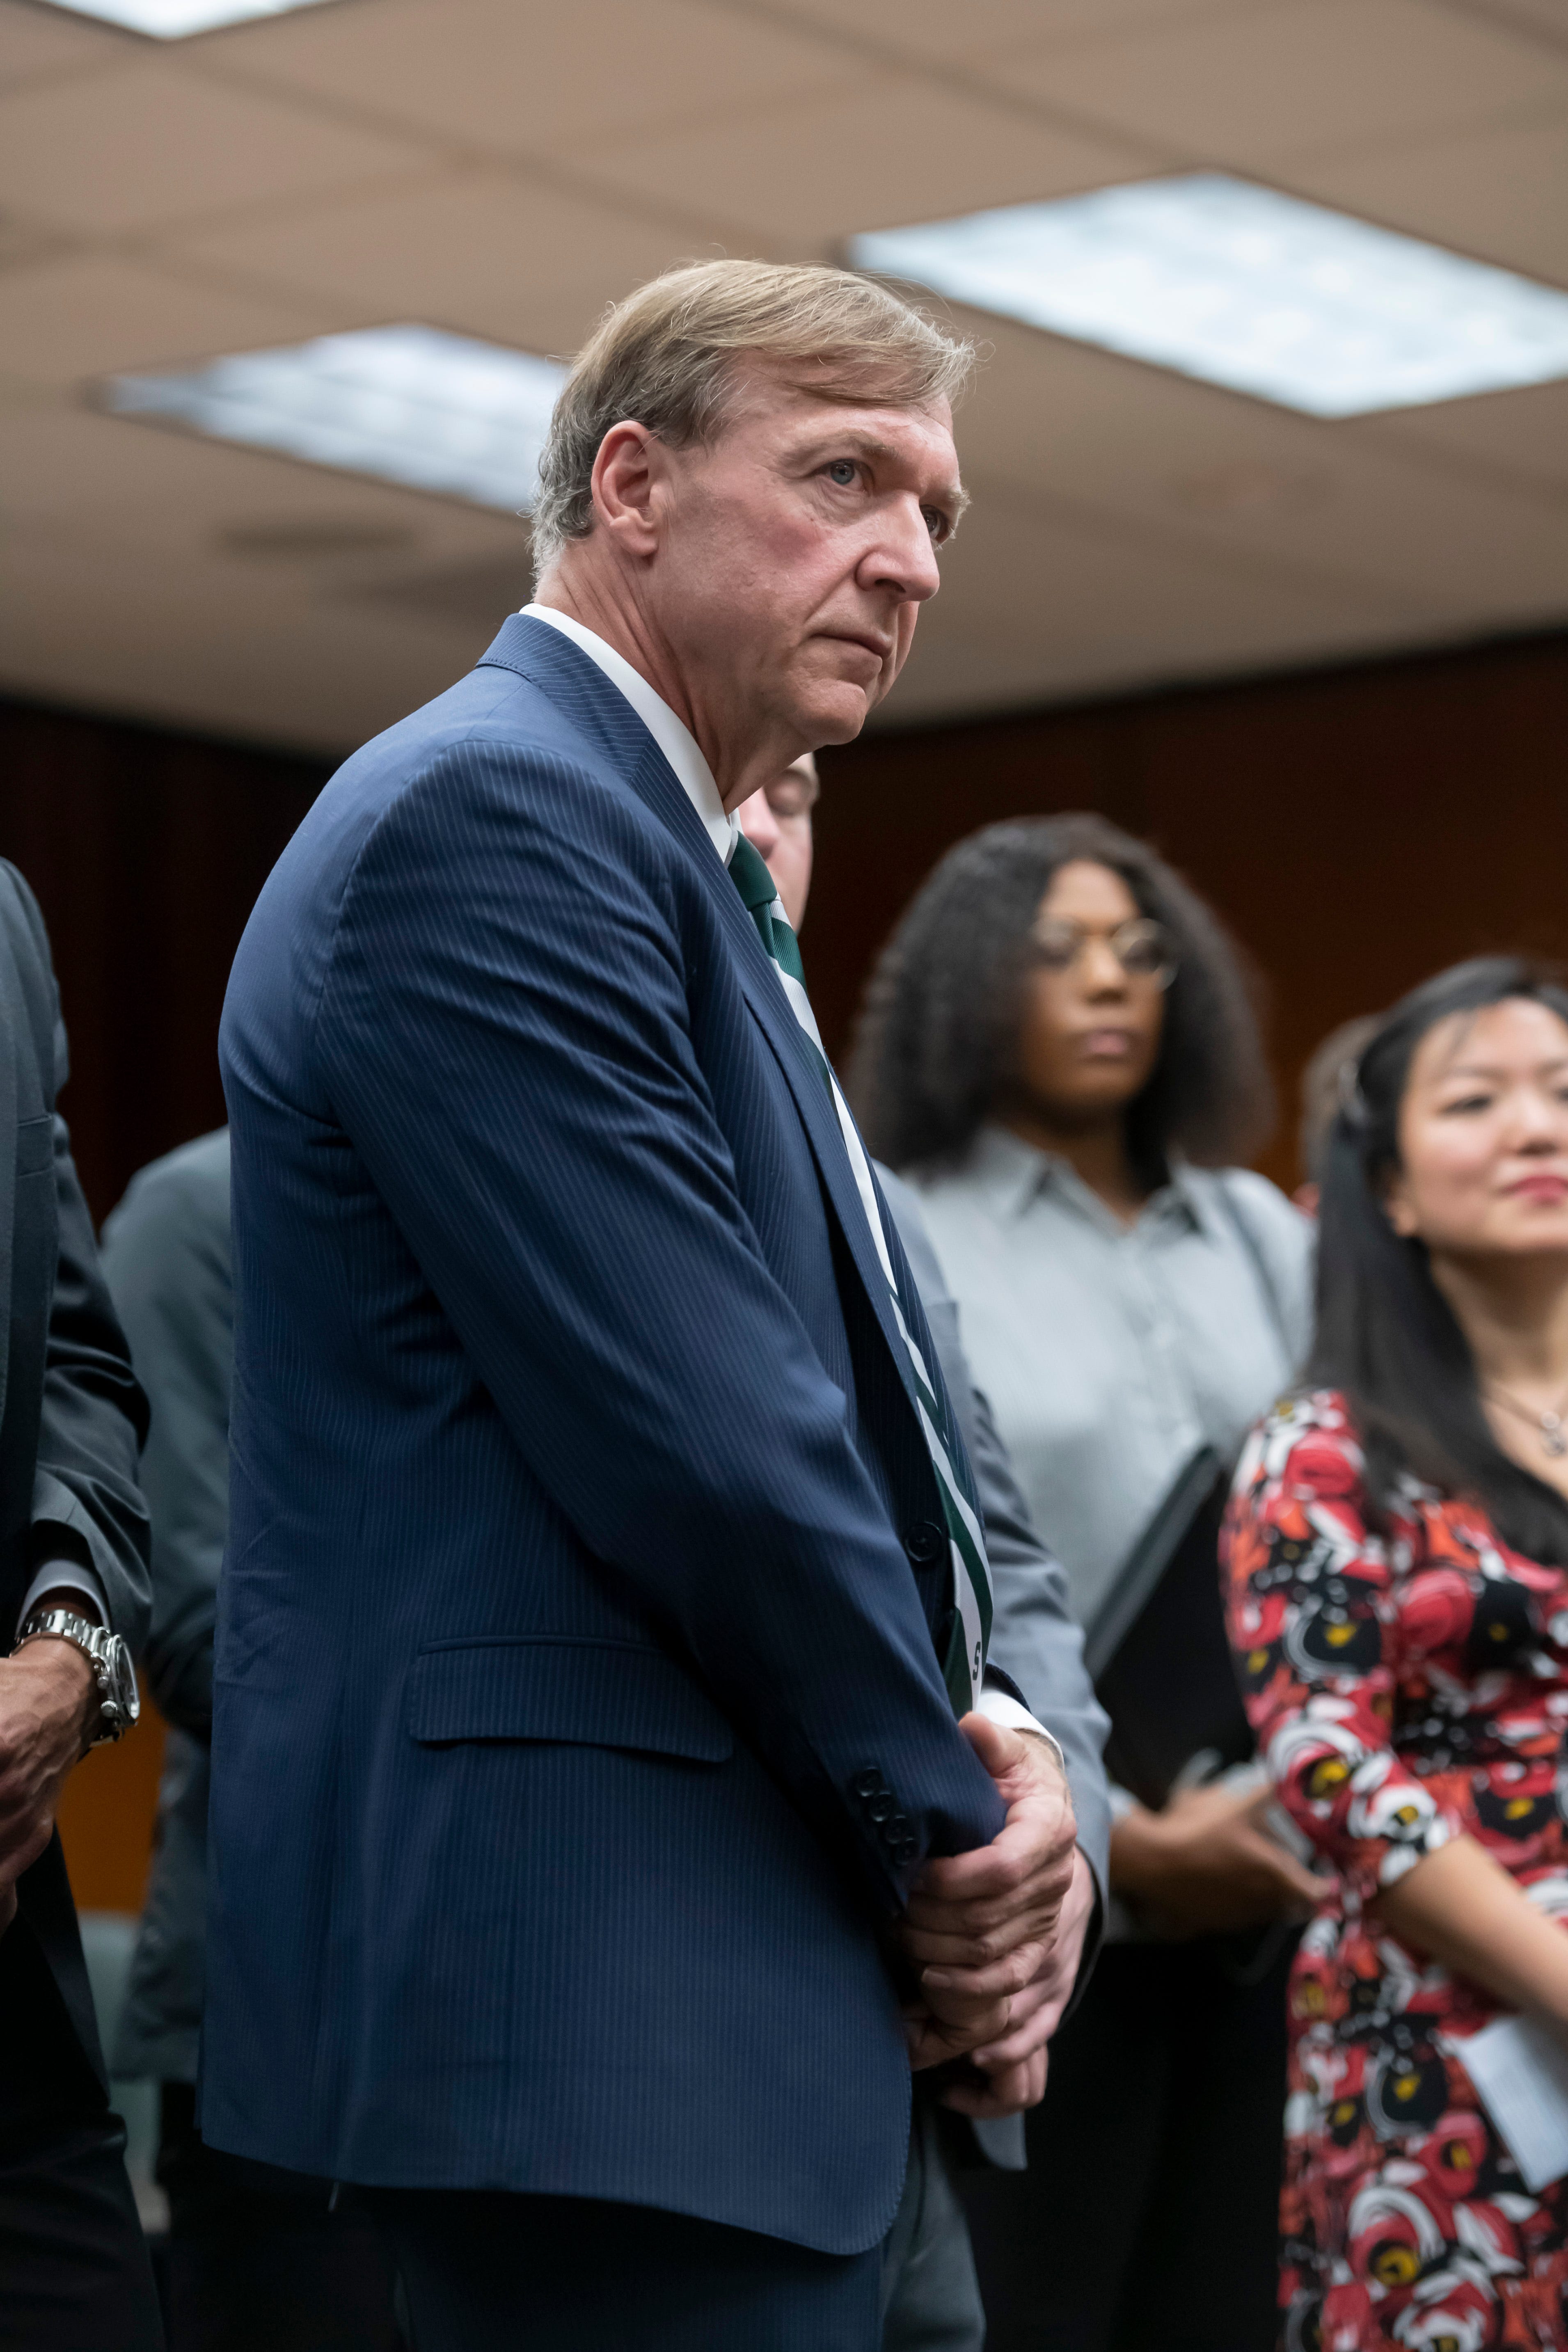 Samuel Stanley Jr. participates in a question and answer session after being named Michigan State University's 21st president, May 28, 2019.